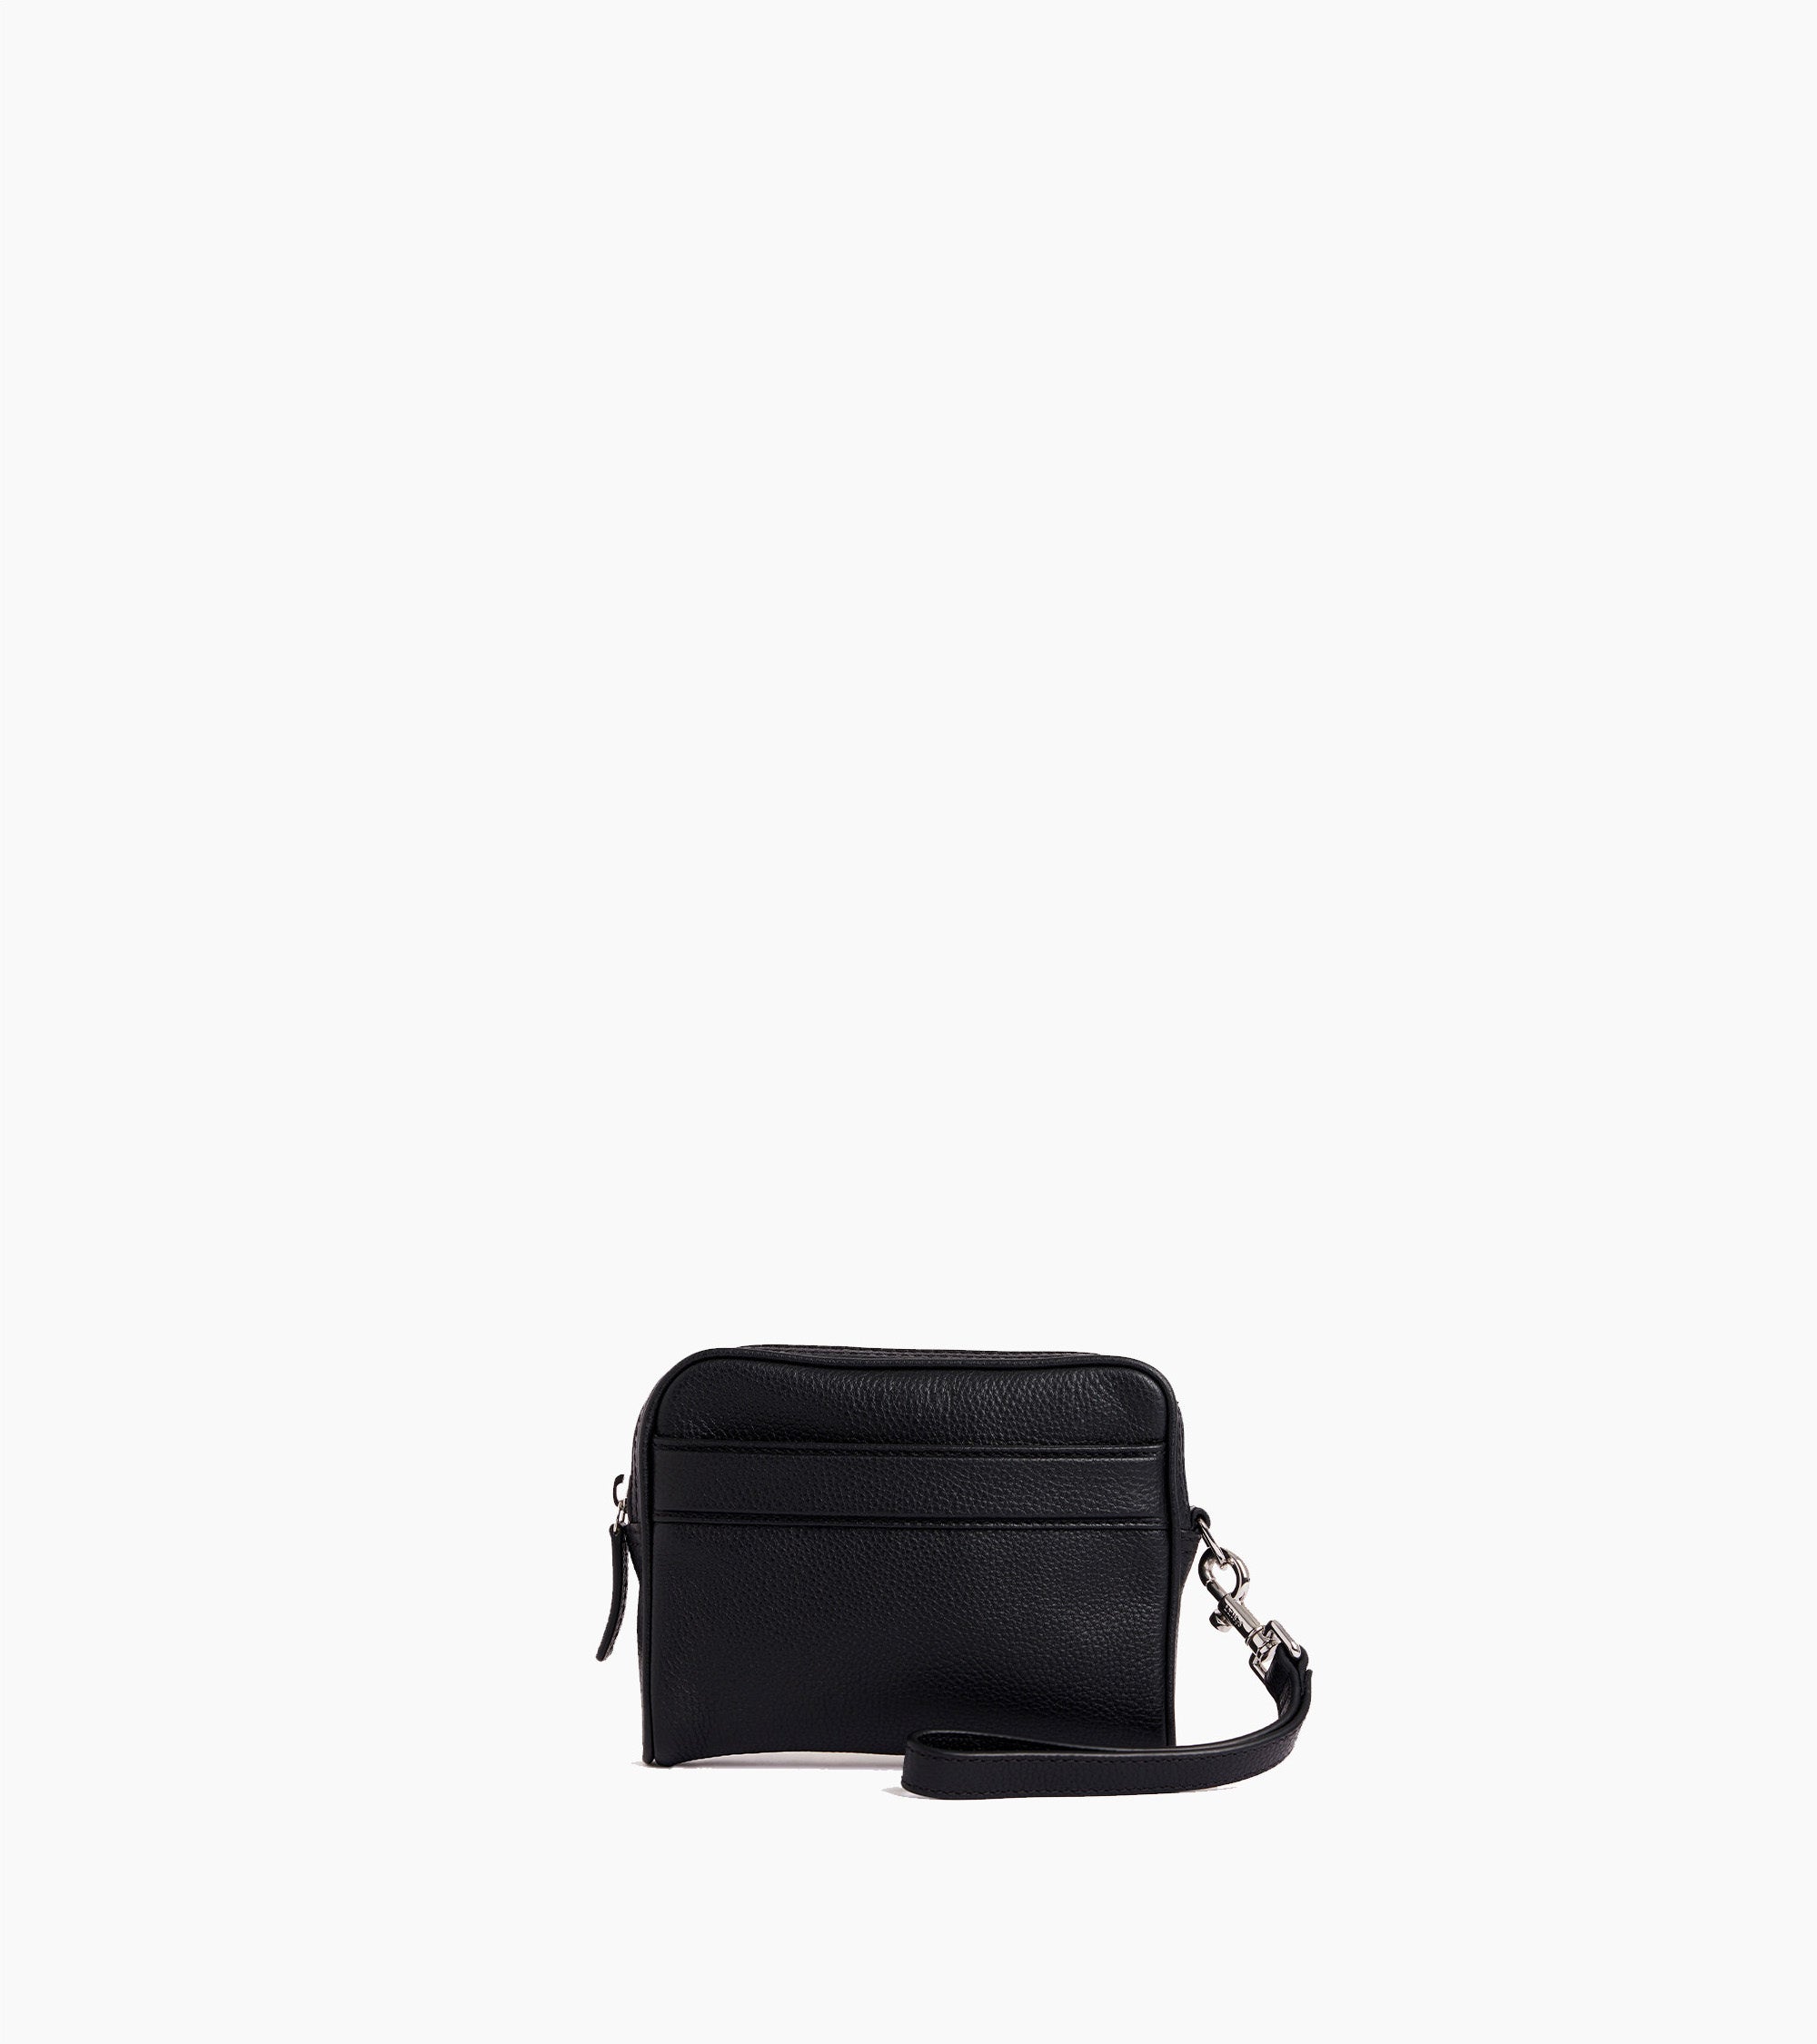 Charles grained leather pouch with detachable strap